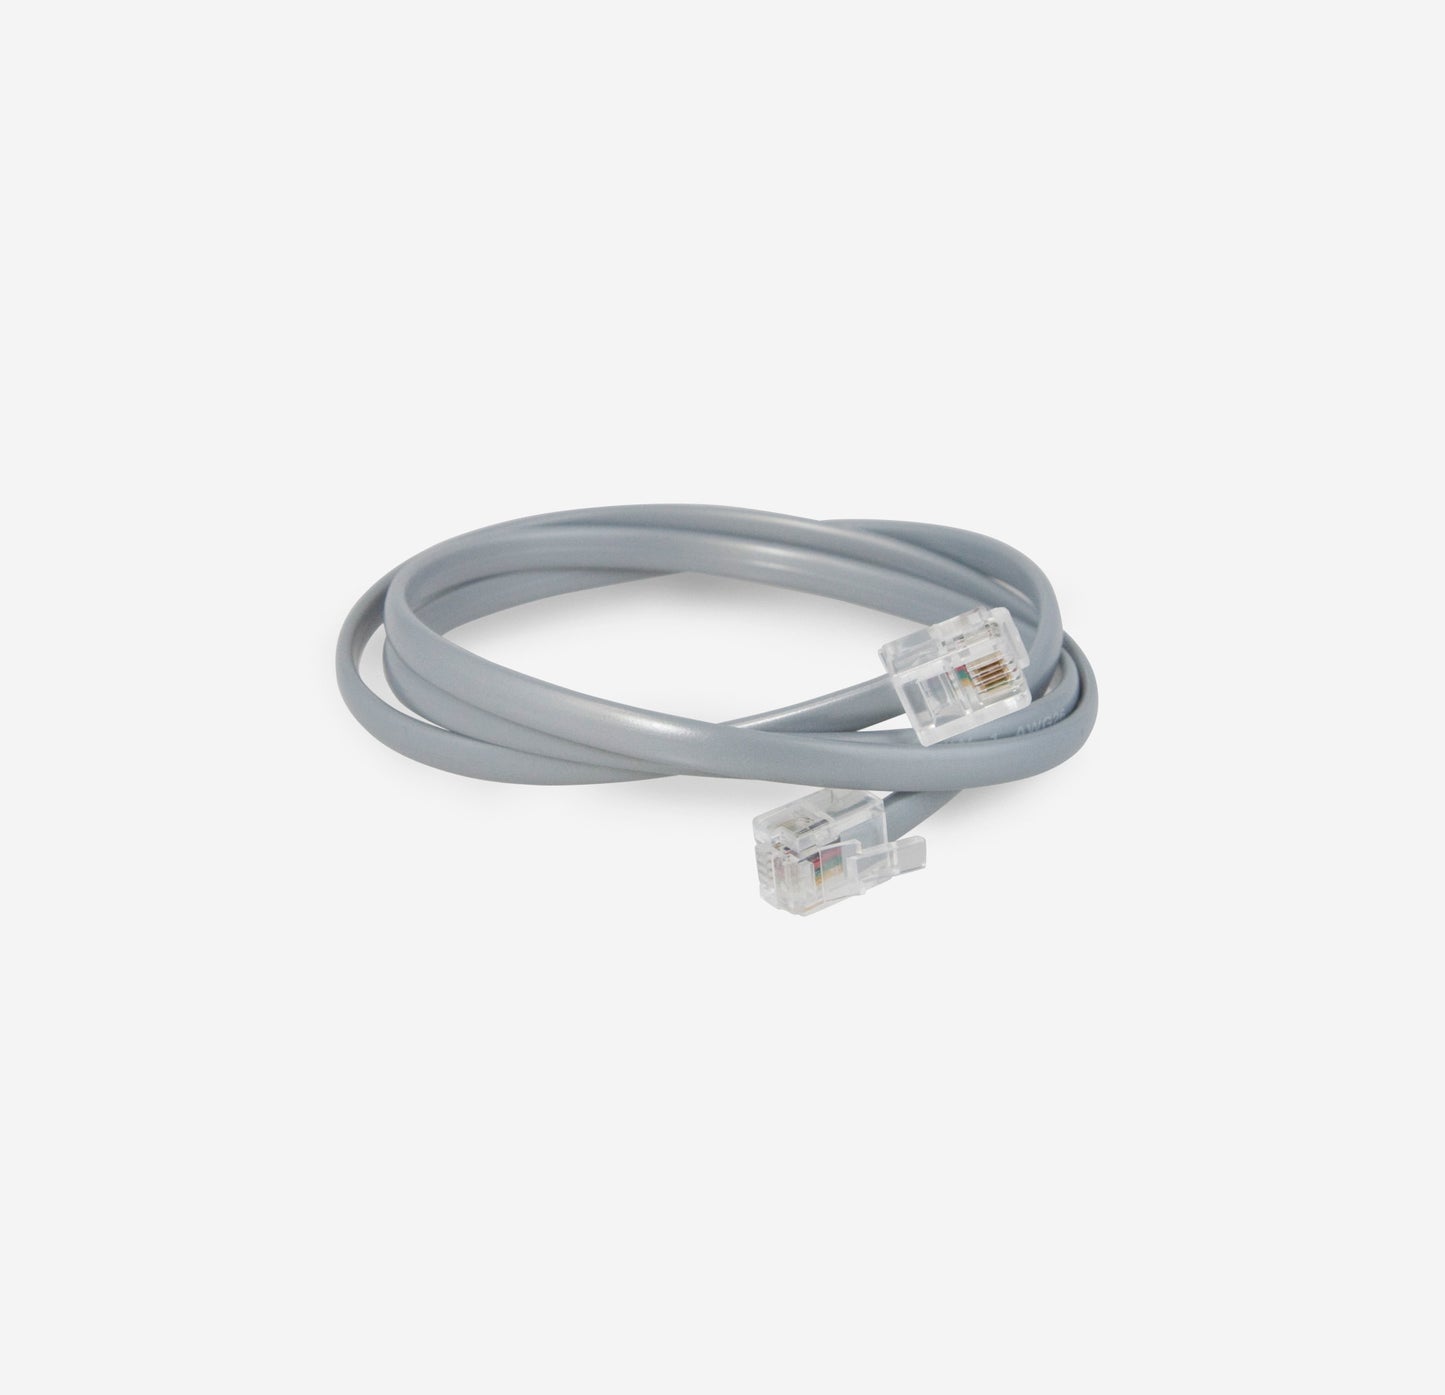 Cable for connecting PM-4 to PS-200, 30"